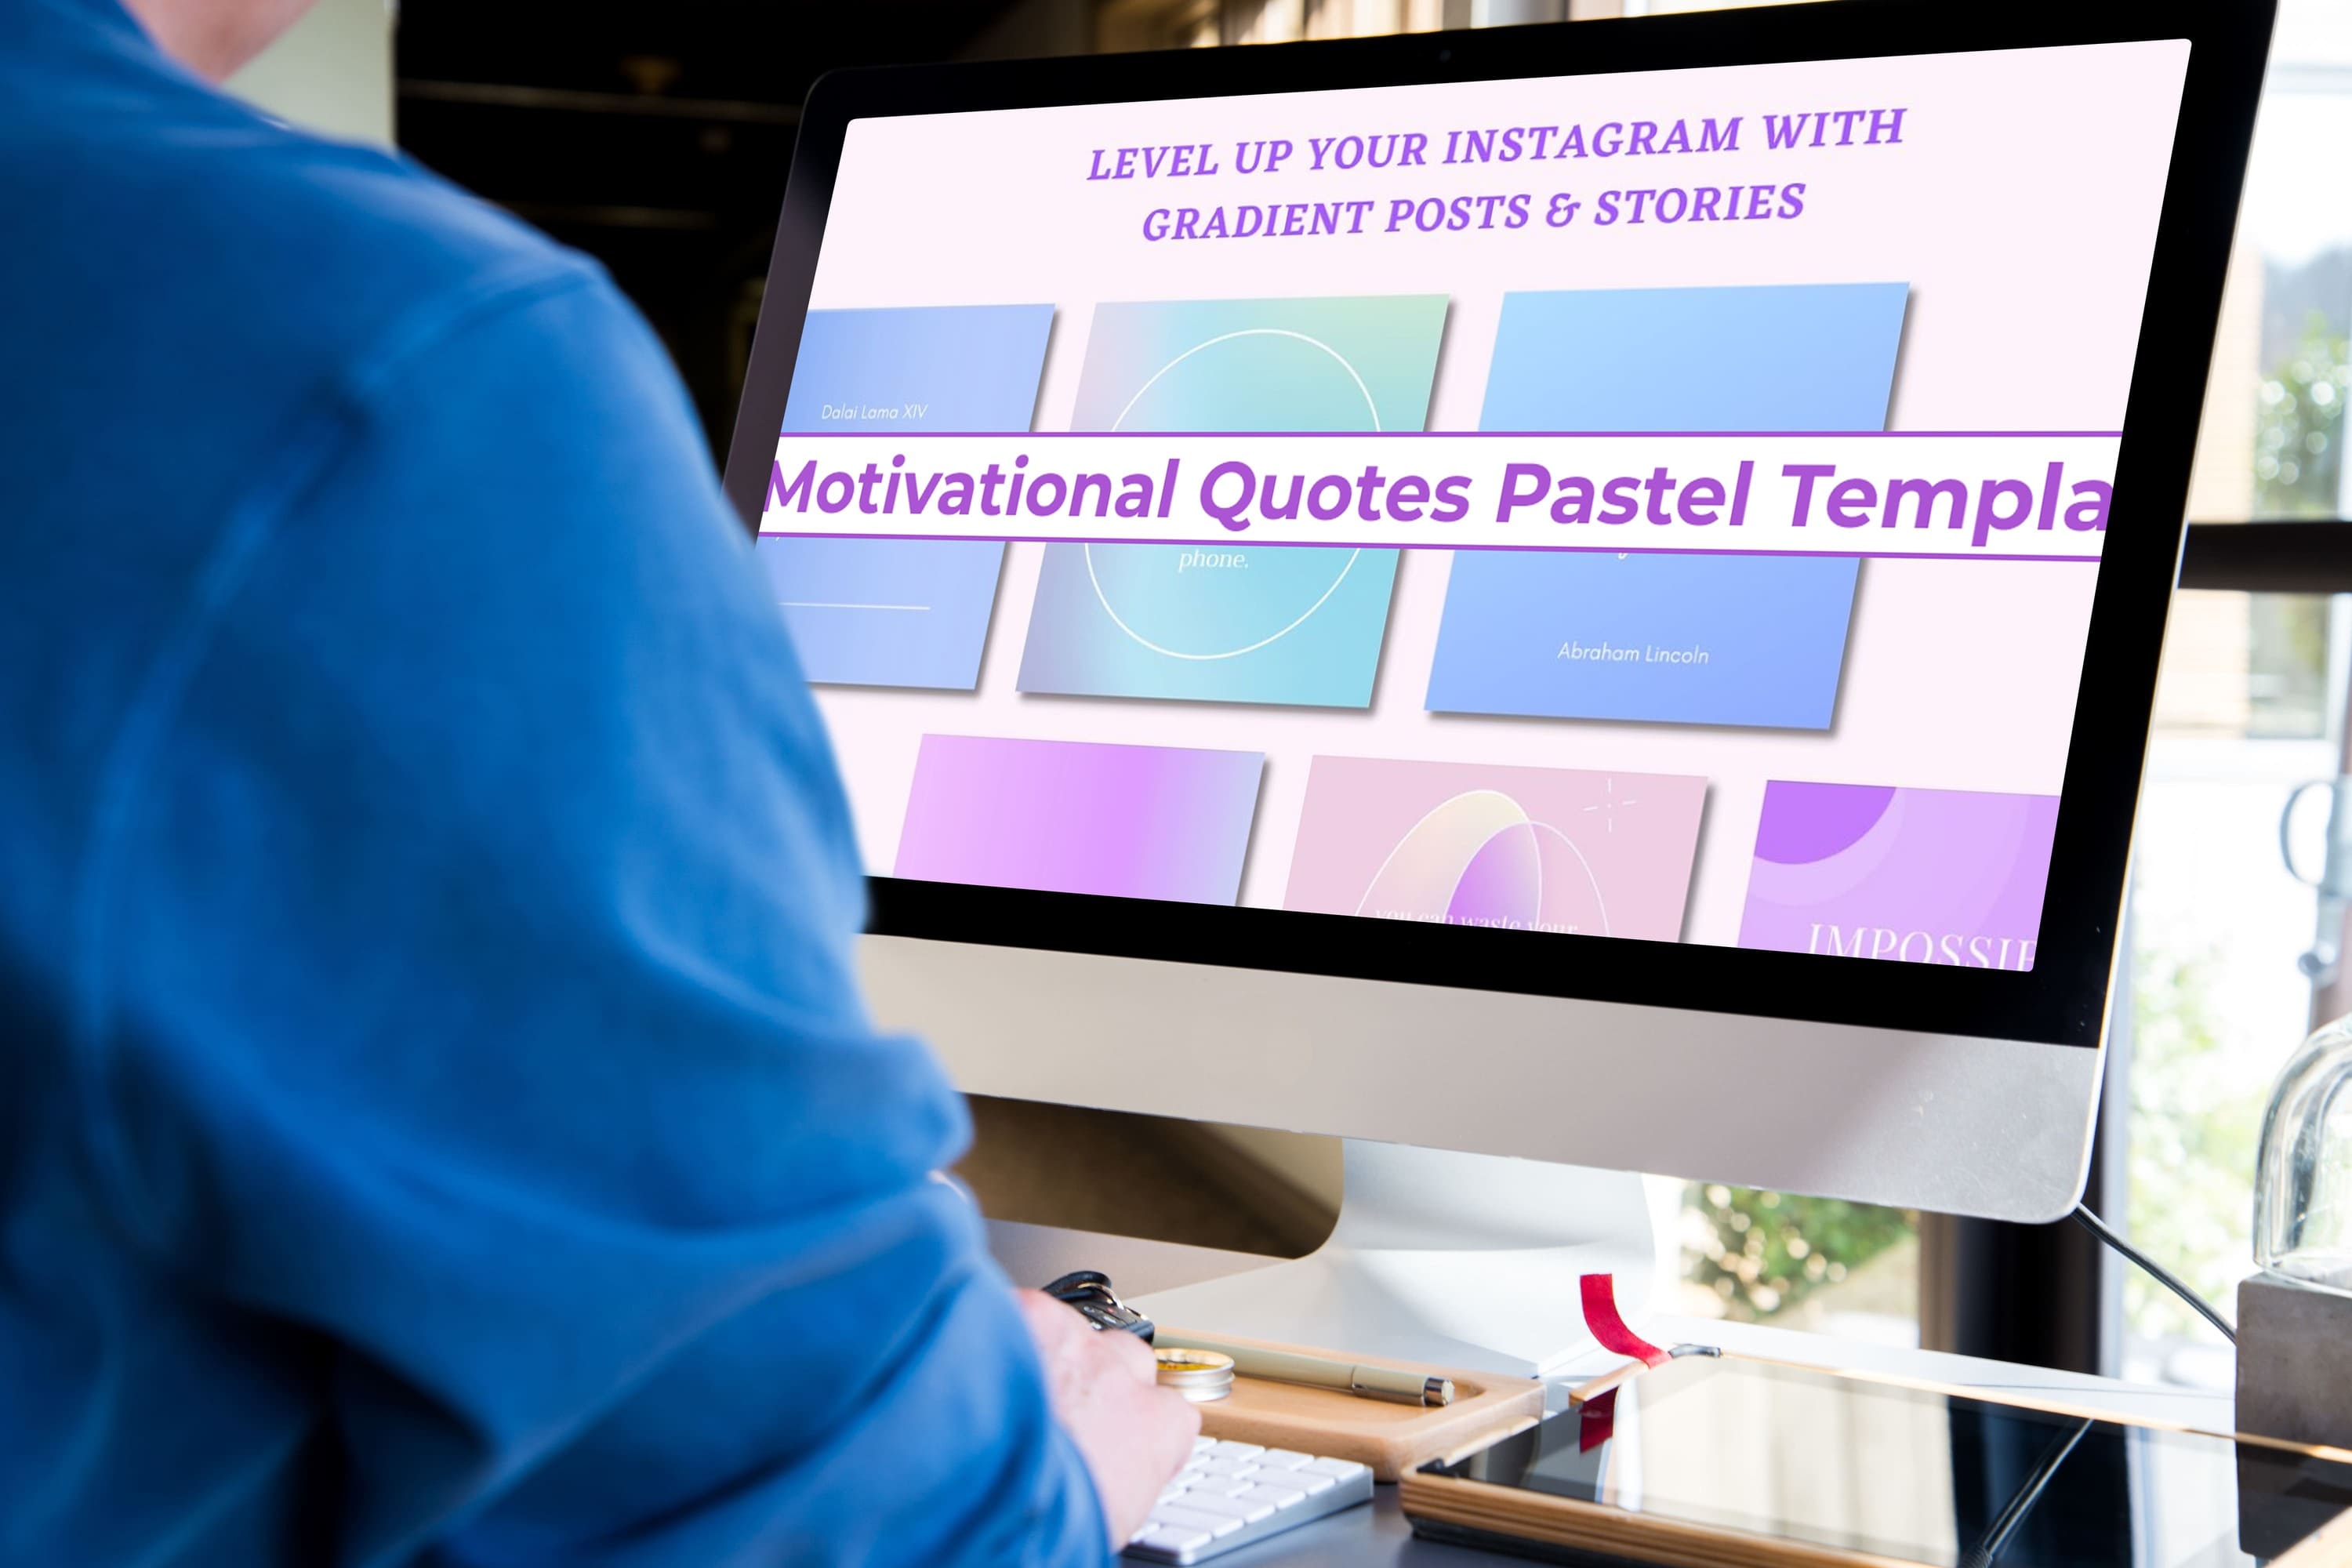 Motivational Quotes Pastel Template - Level Up Your Instagram With Gradient Posts & Stories.